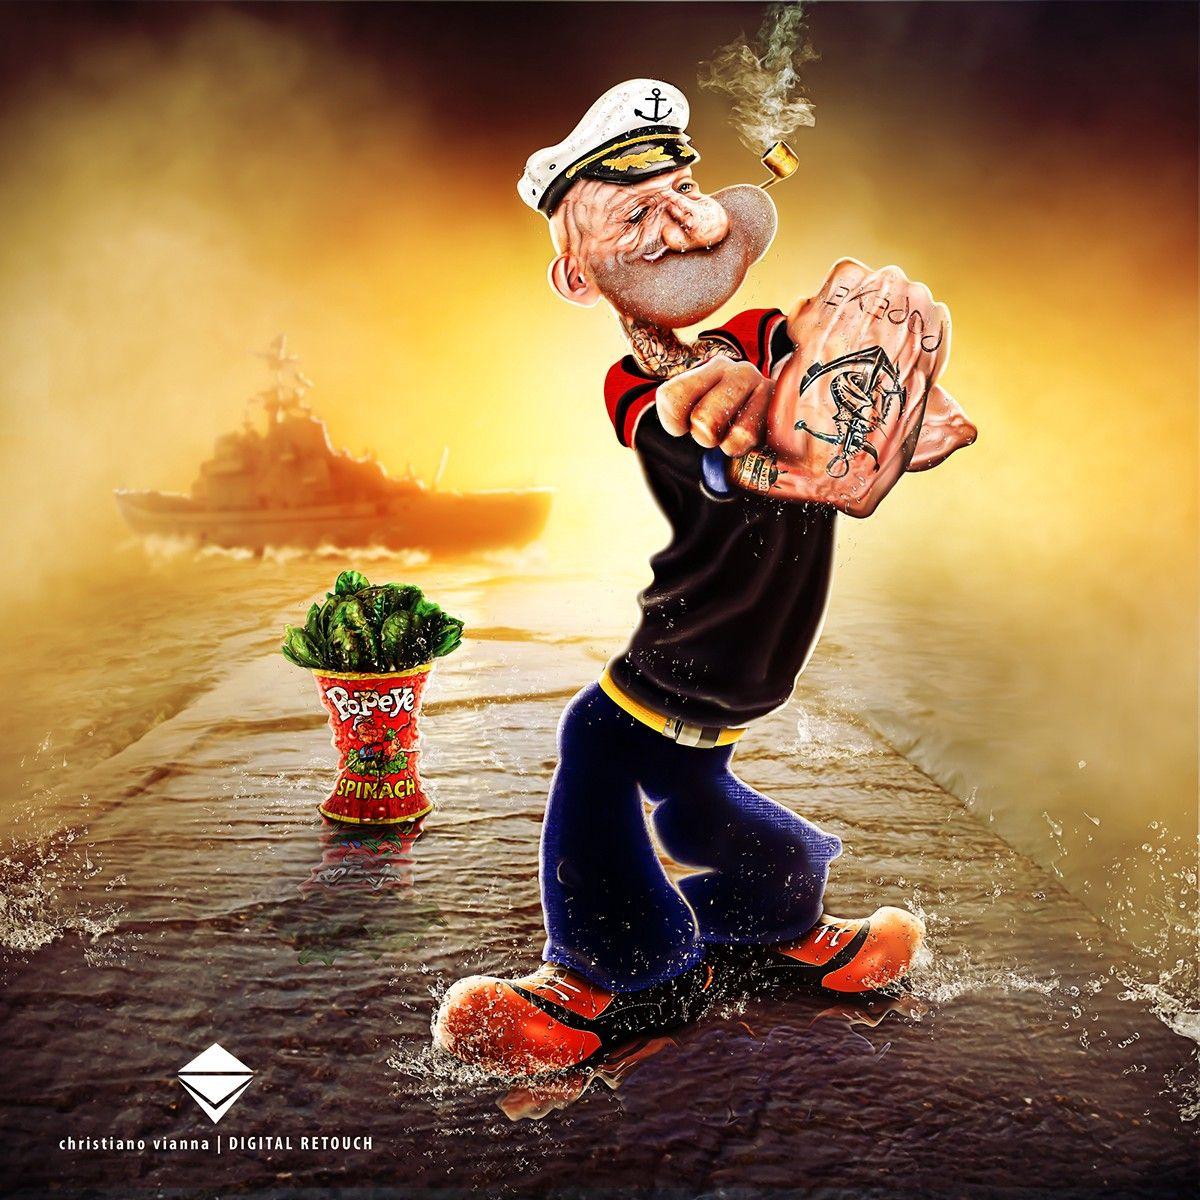 Popeye Movie HD Wallpapers  Popeye HD Movie Wallpapers Free Download  1080p to 2K  FilmiBeat